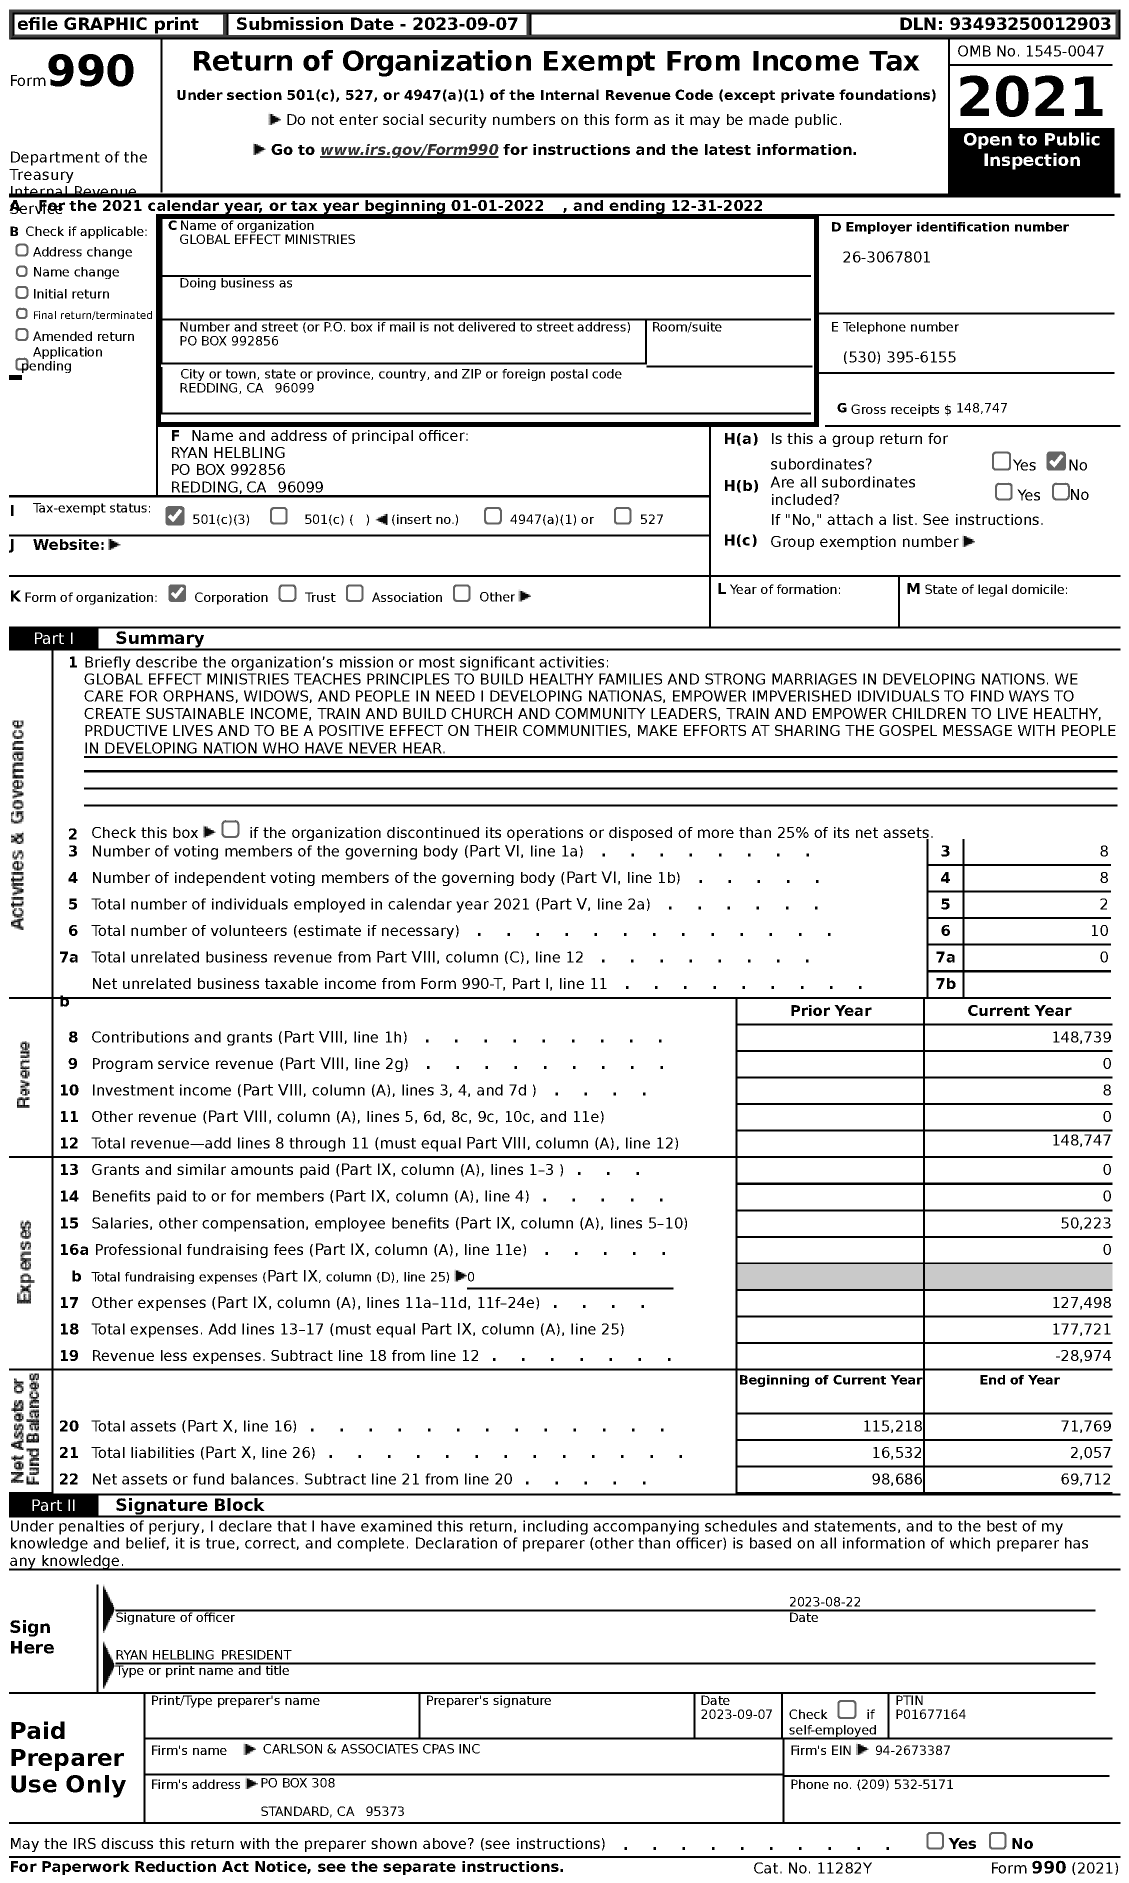 Image of first page of 2022 Form 990 for Global Effect Ministries